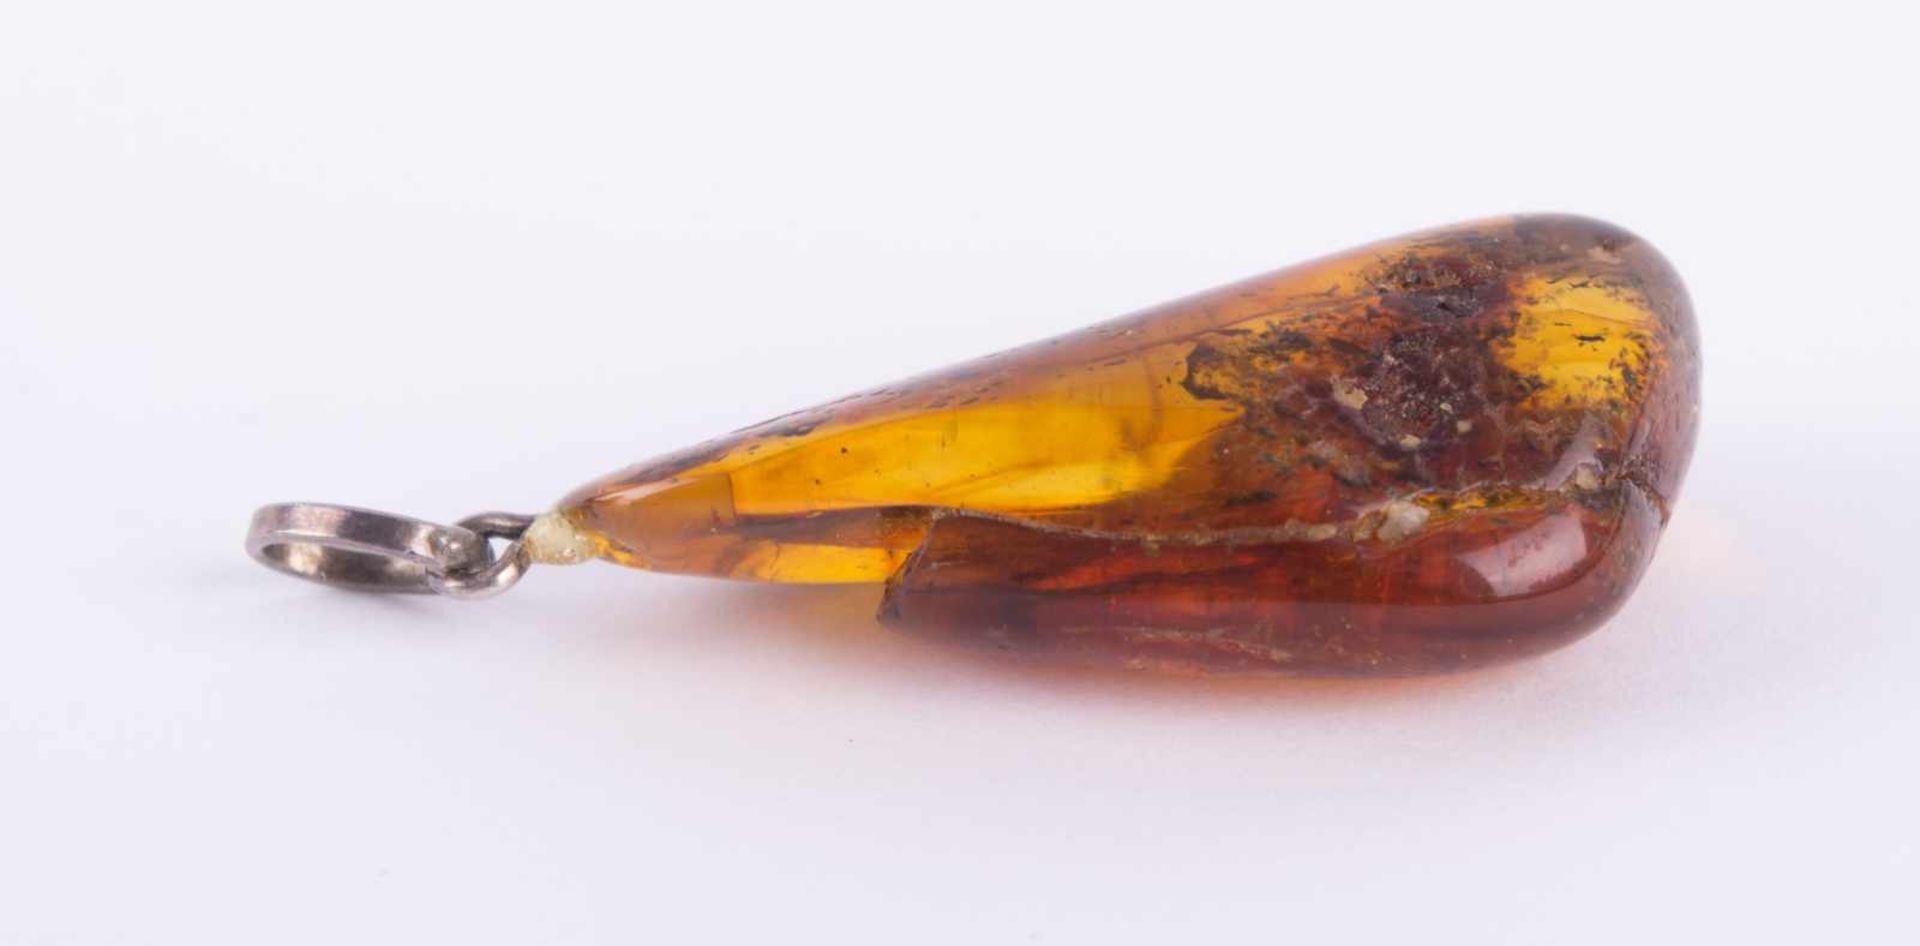 Bernstein Anhänger um 1930/40 37 mm x 18 mm x 10 mm amber pendant about 1930/40 dimensions: 37 mm 18 - Image 2 of 3